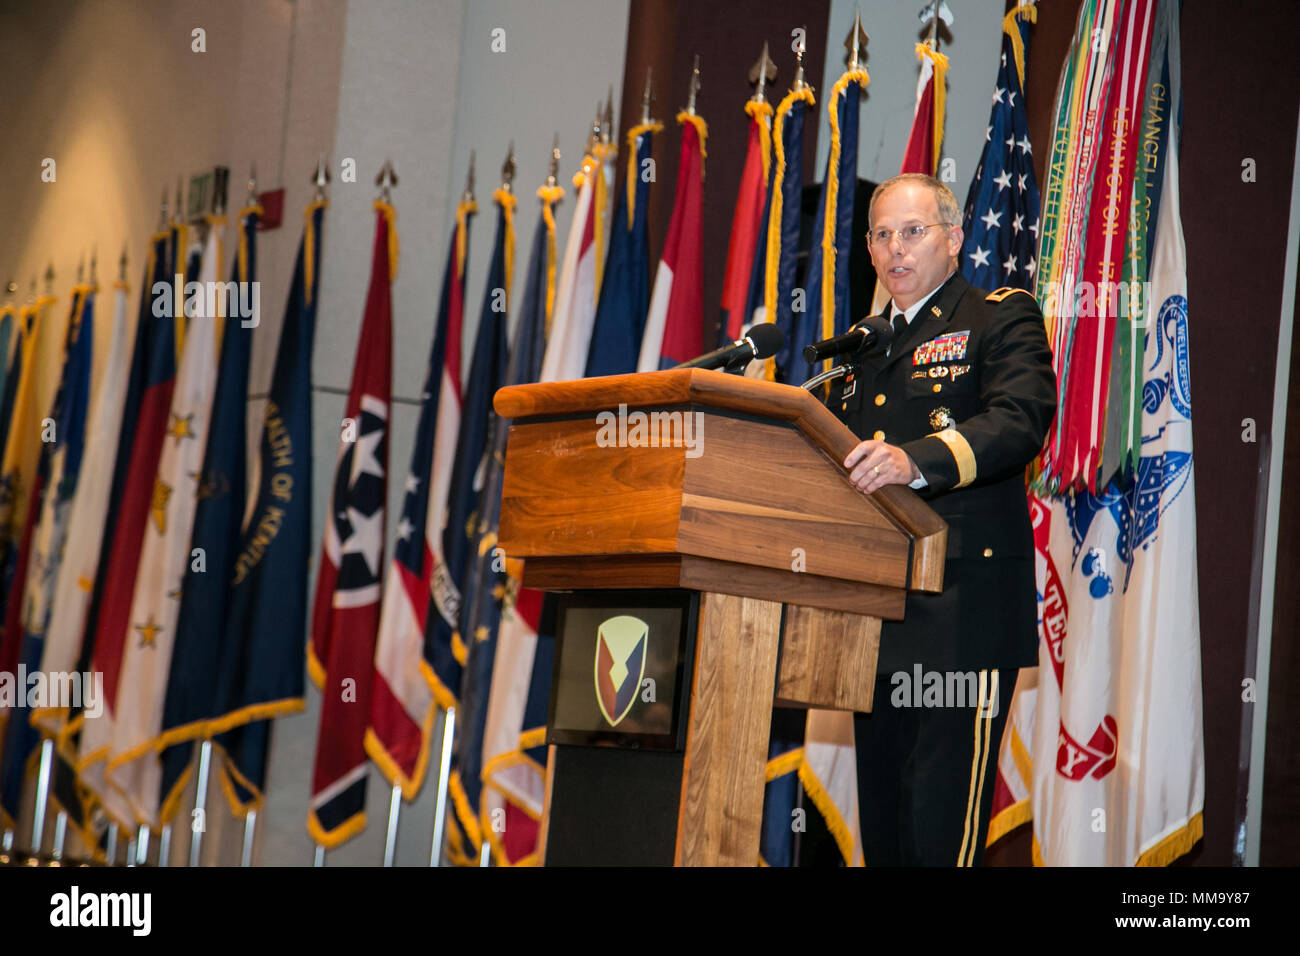 U.S. Army Maj. Gen. Allan Elliott, Chief of Staff for Army Materiel Command, introduces the keynote speaker Mrs. Christine Chavez, during the Hispanic-American Heritage Month Observance Sept. 25, 2017 at Redstone Arsenal, Alabama.  Chavez is the granddaughter of labor leader and civil rights activist Cesar Chavez.  (U.S. Army photo by Sgt. 1st Class Teddy Wade) Stock Photo